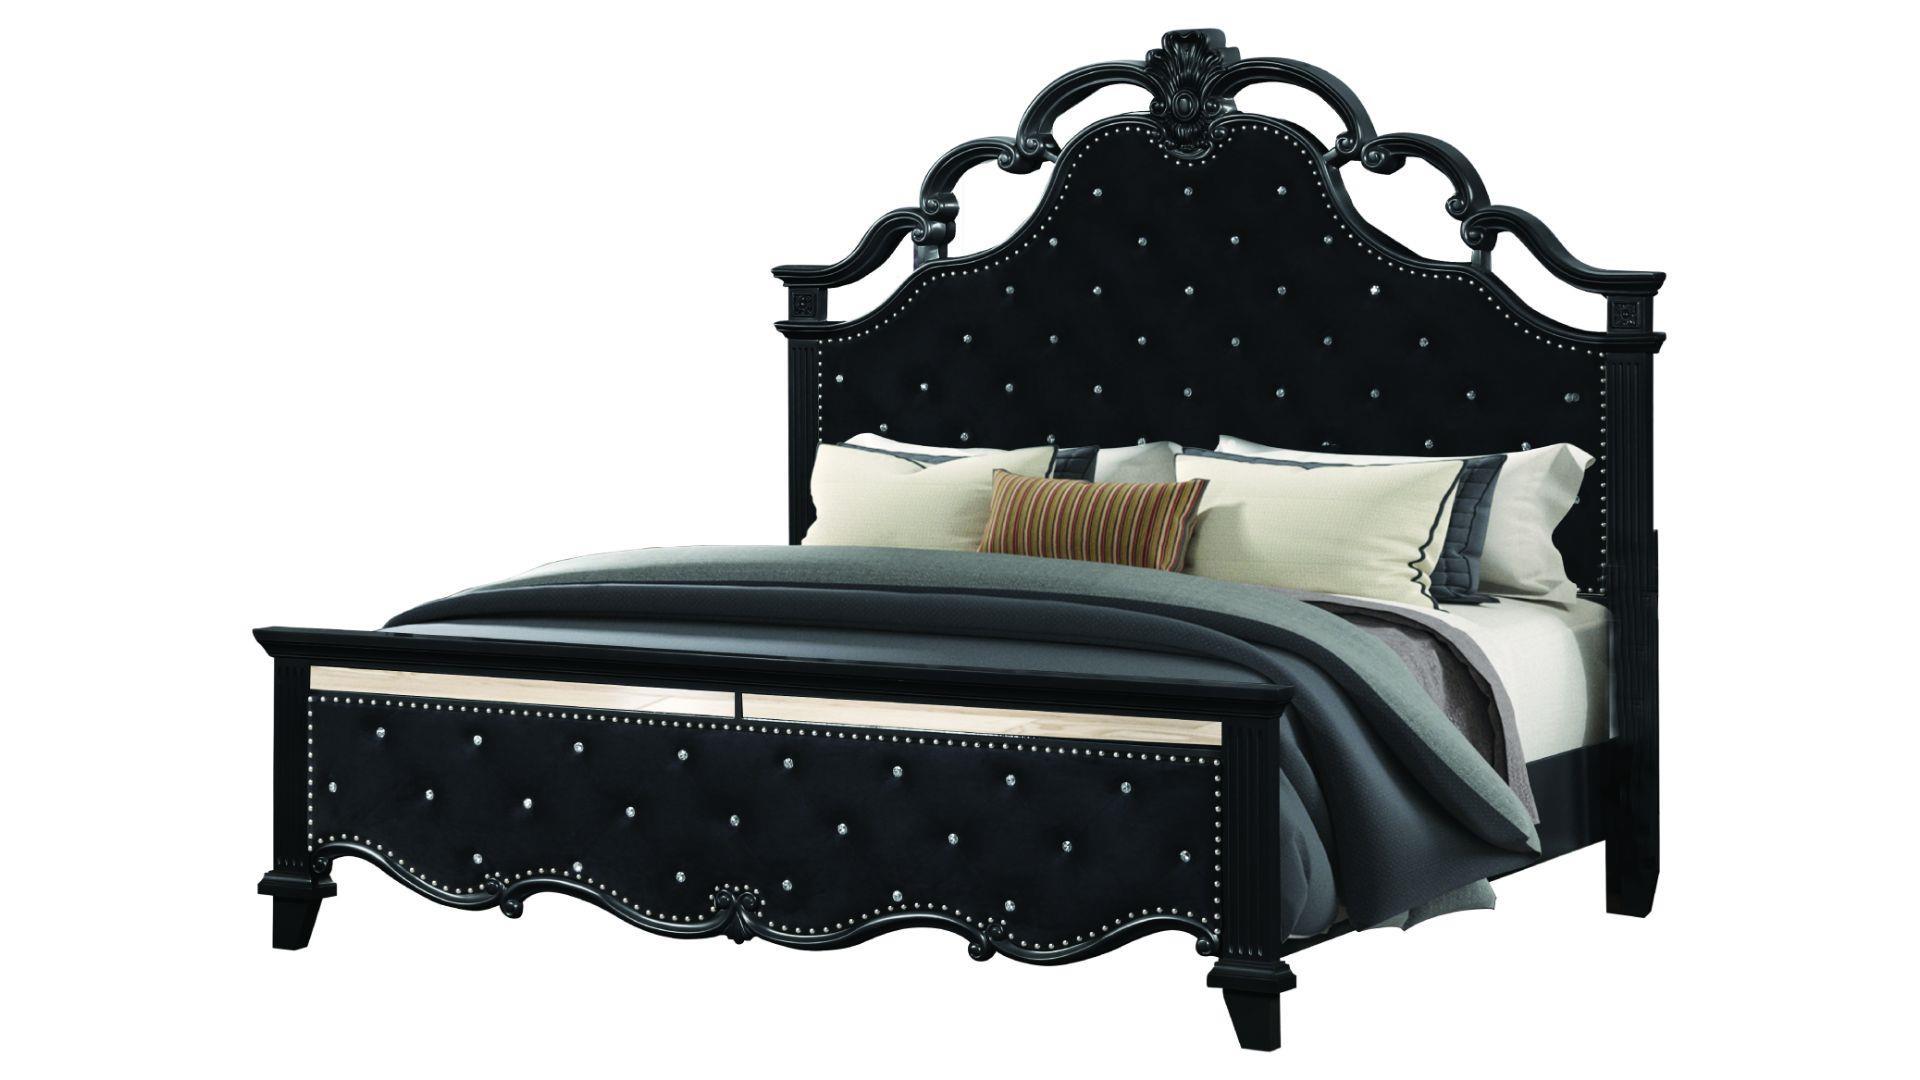 

    
Glam Black Tufted King Bed MILAN Galaxy Home Contemporary Modern
